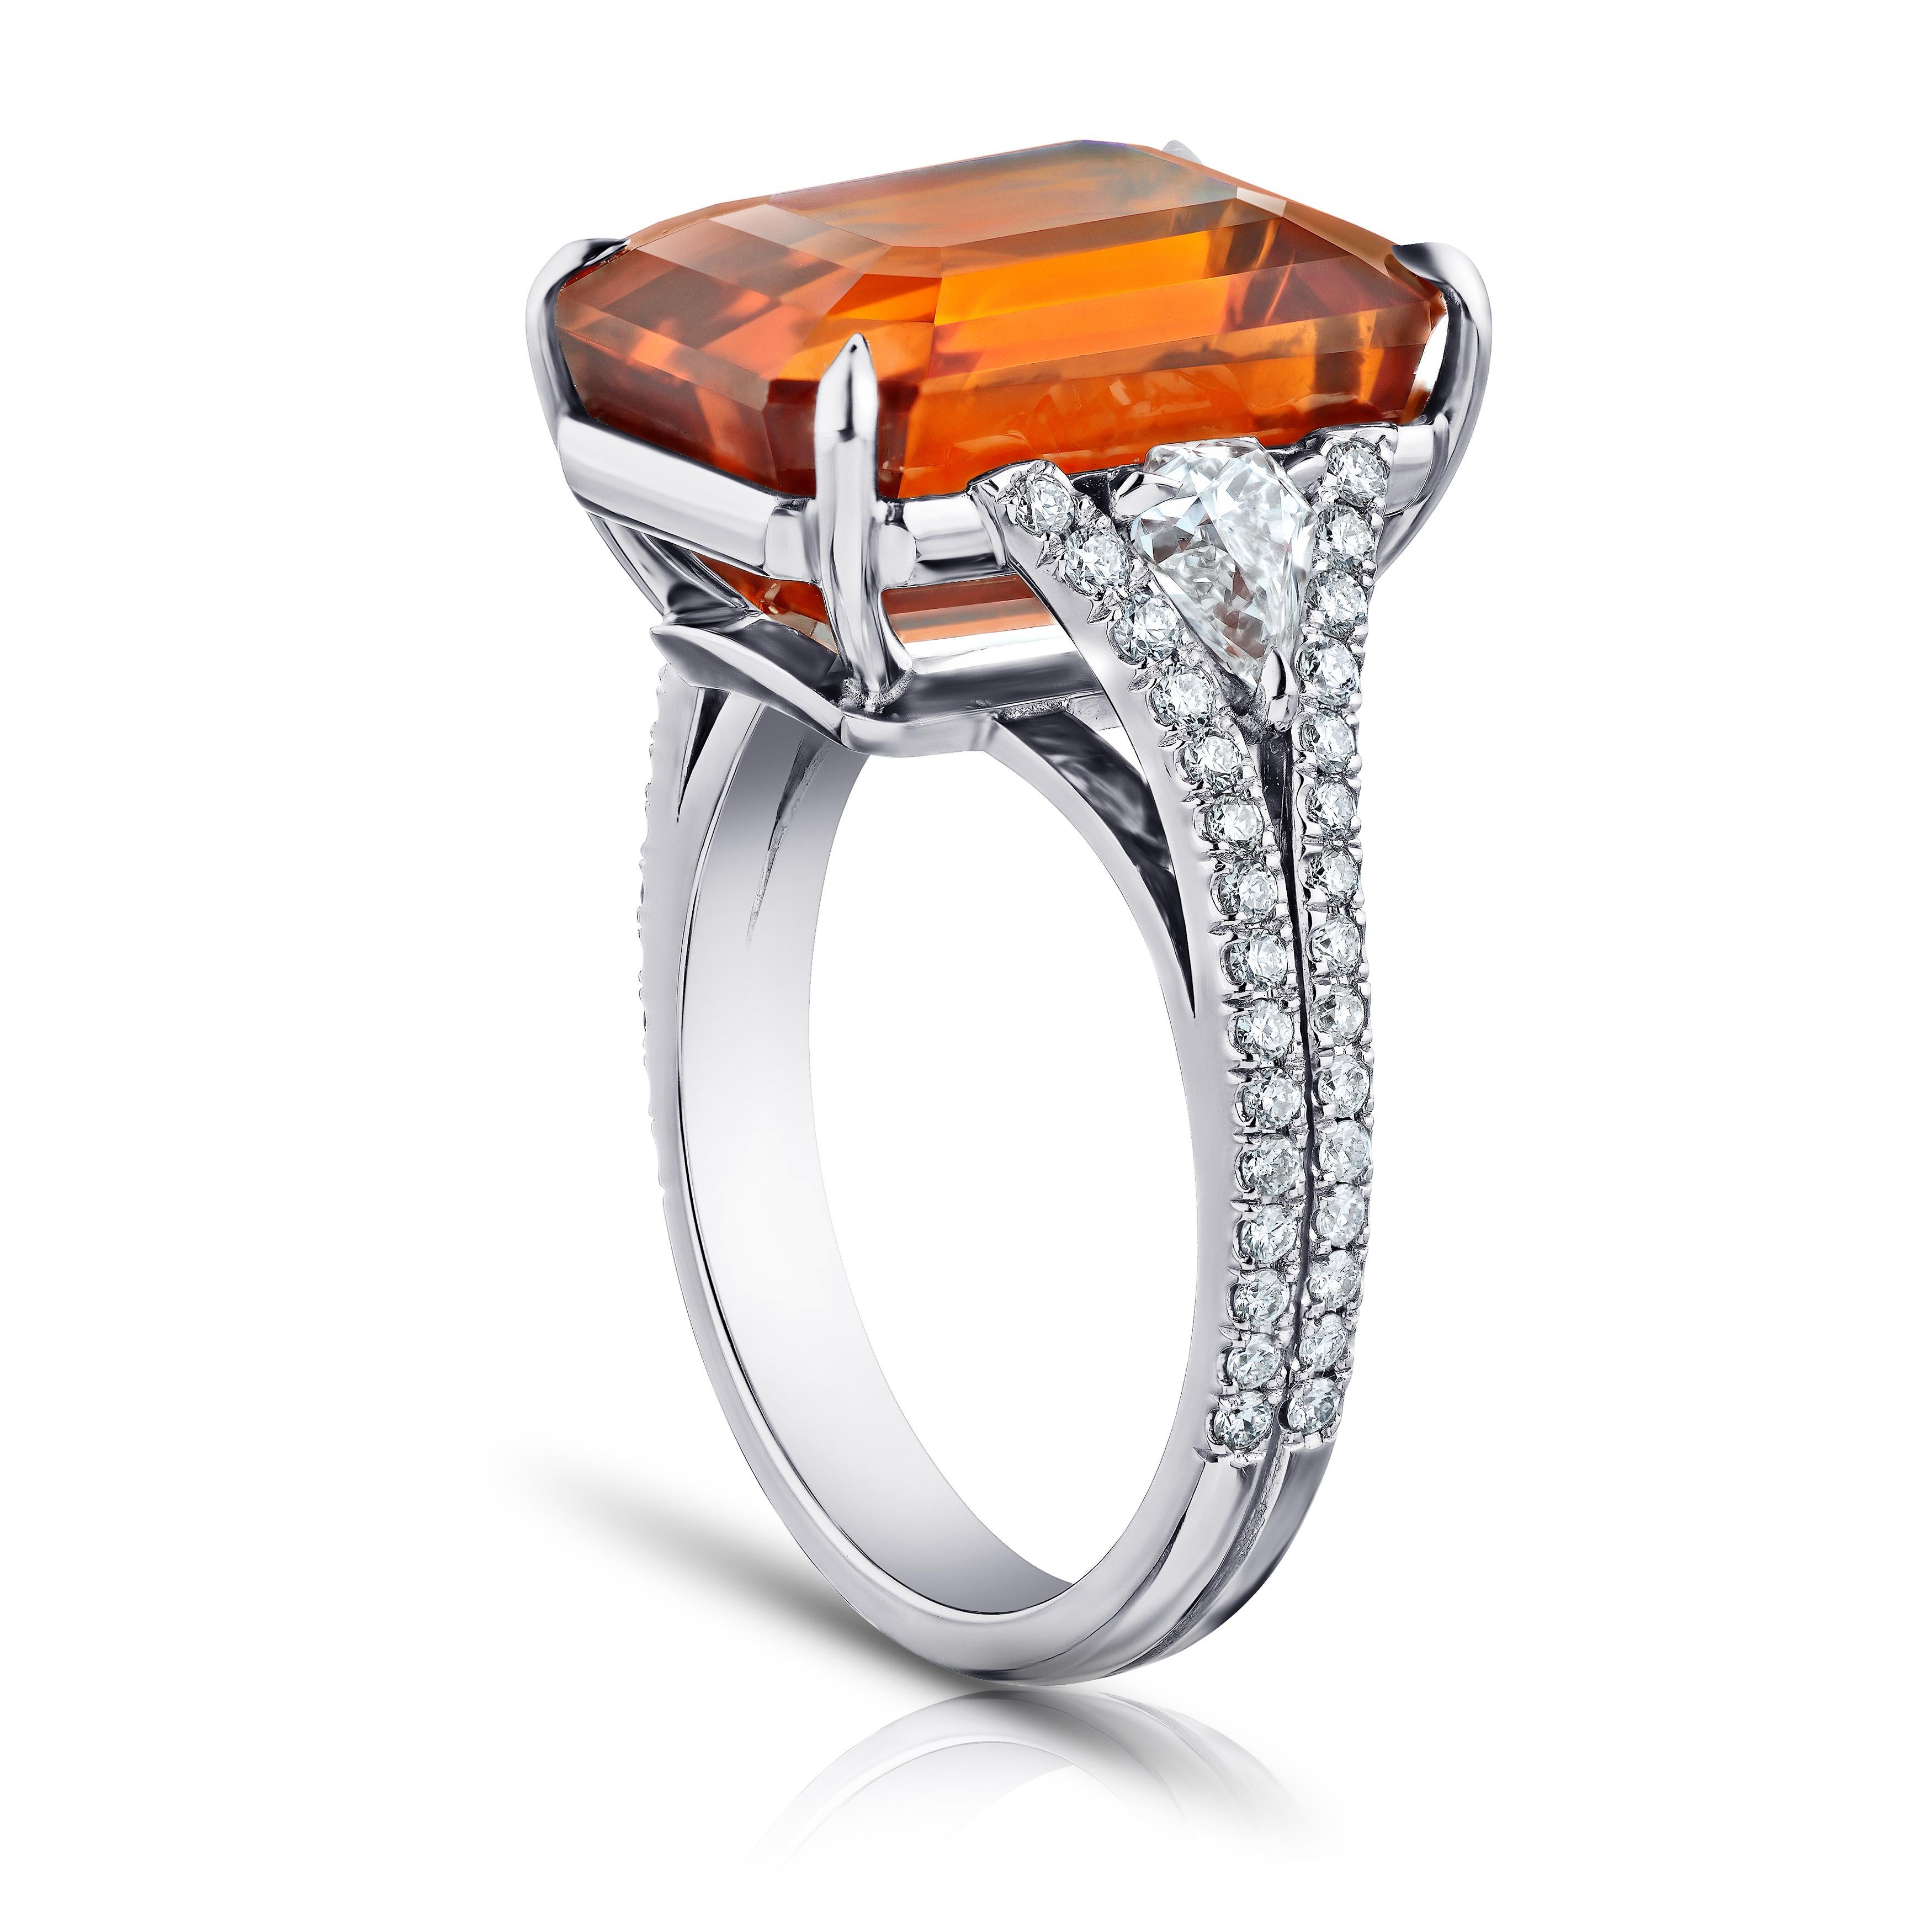 16.10 carat emerald cut orange sapphire with 2 shield shape diamonds .64 carats and 60 round diamonds .66 carats set in a platinum ring. This ring is currently a size 7.  We will resize to your finger size without charge.
